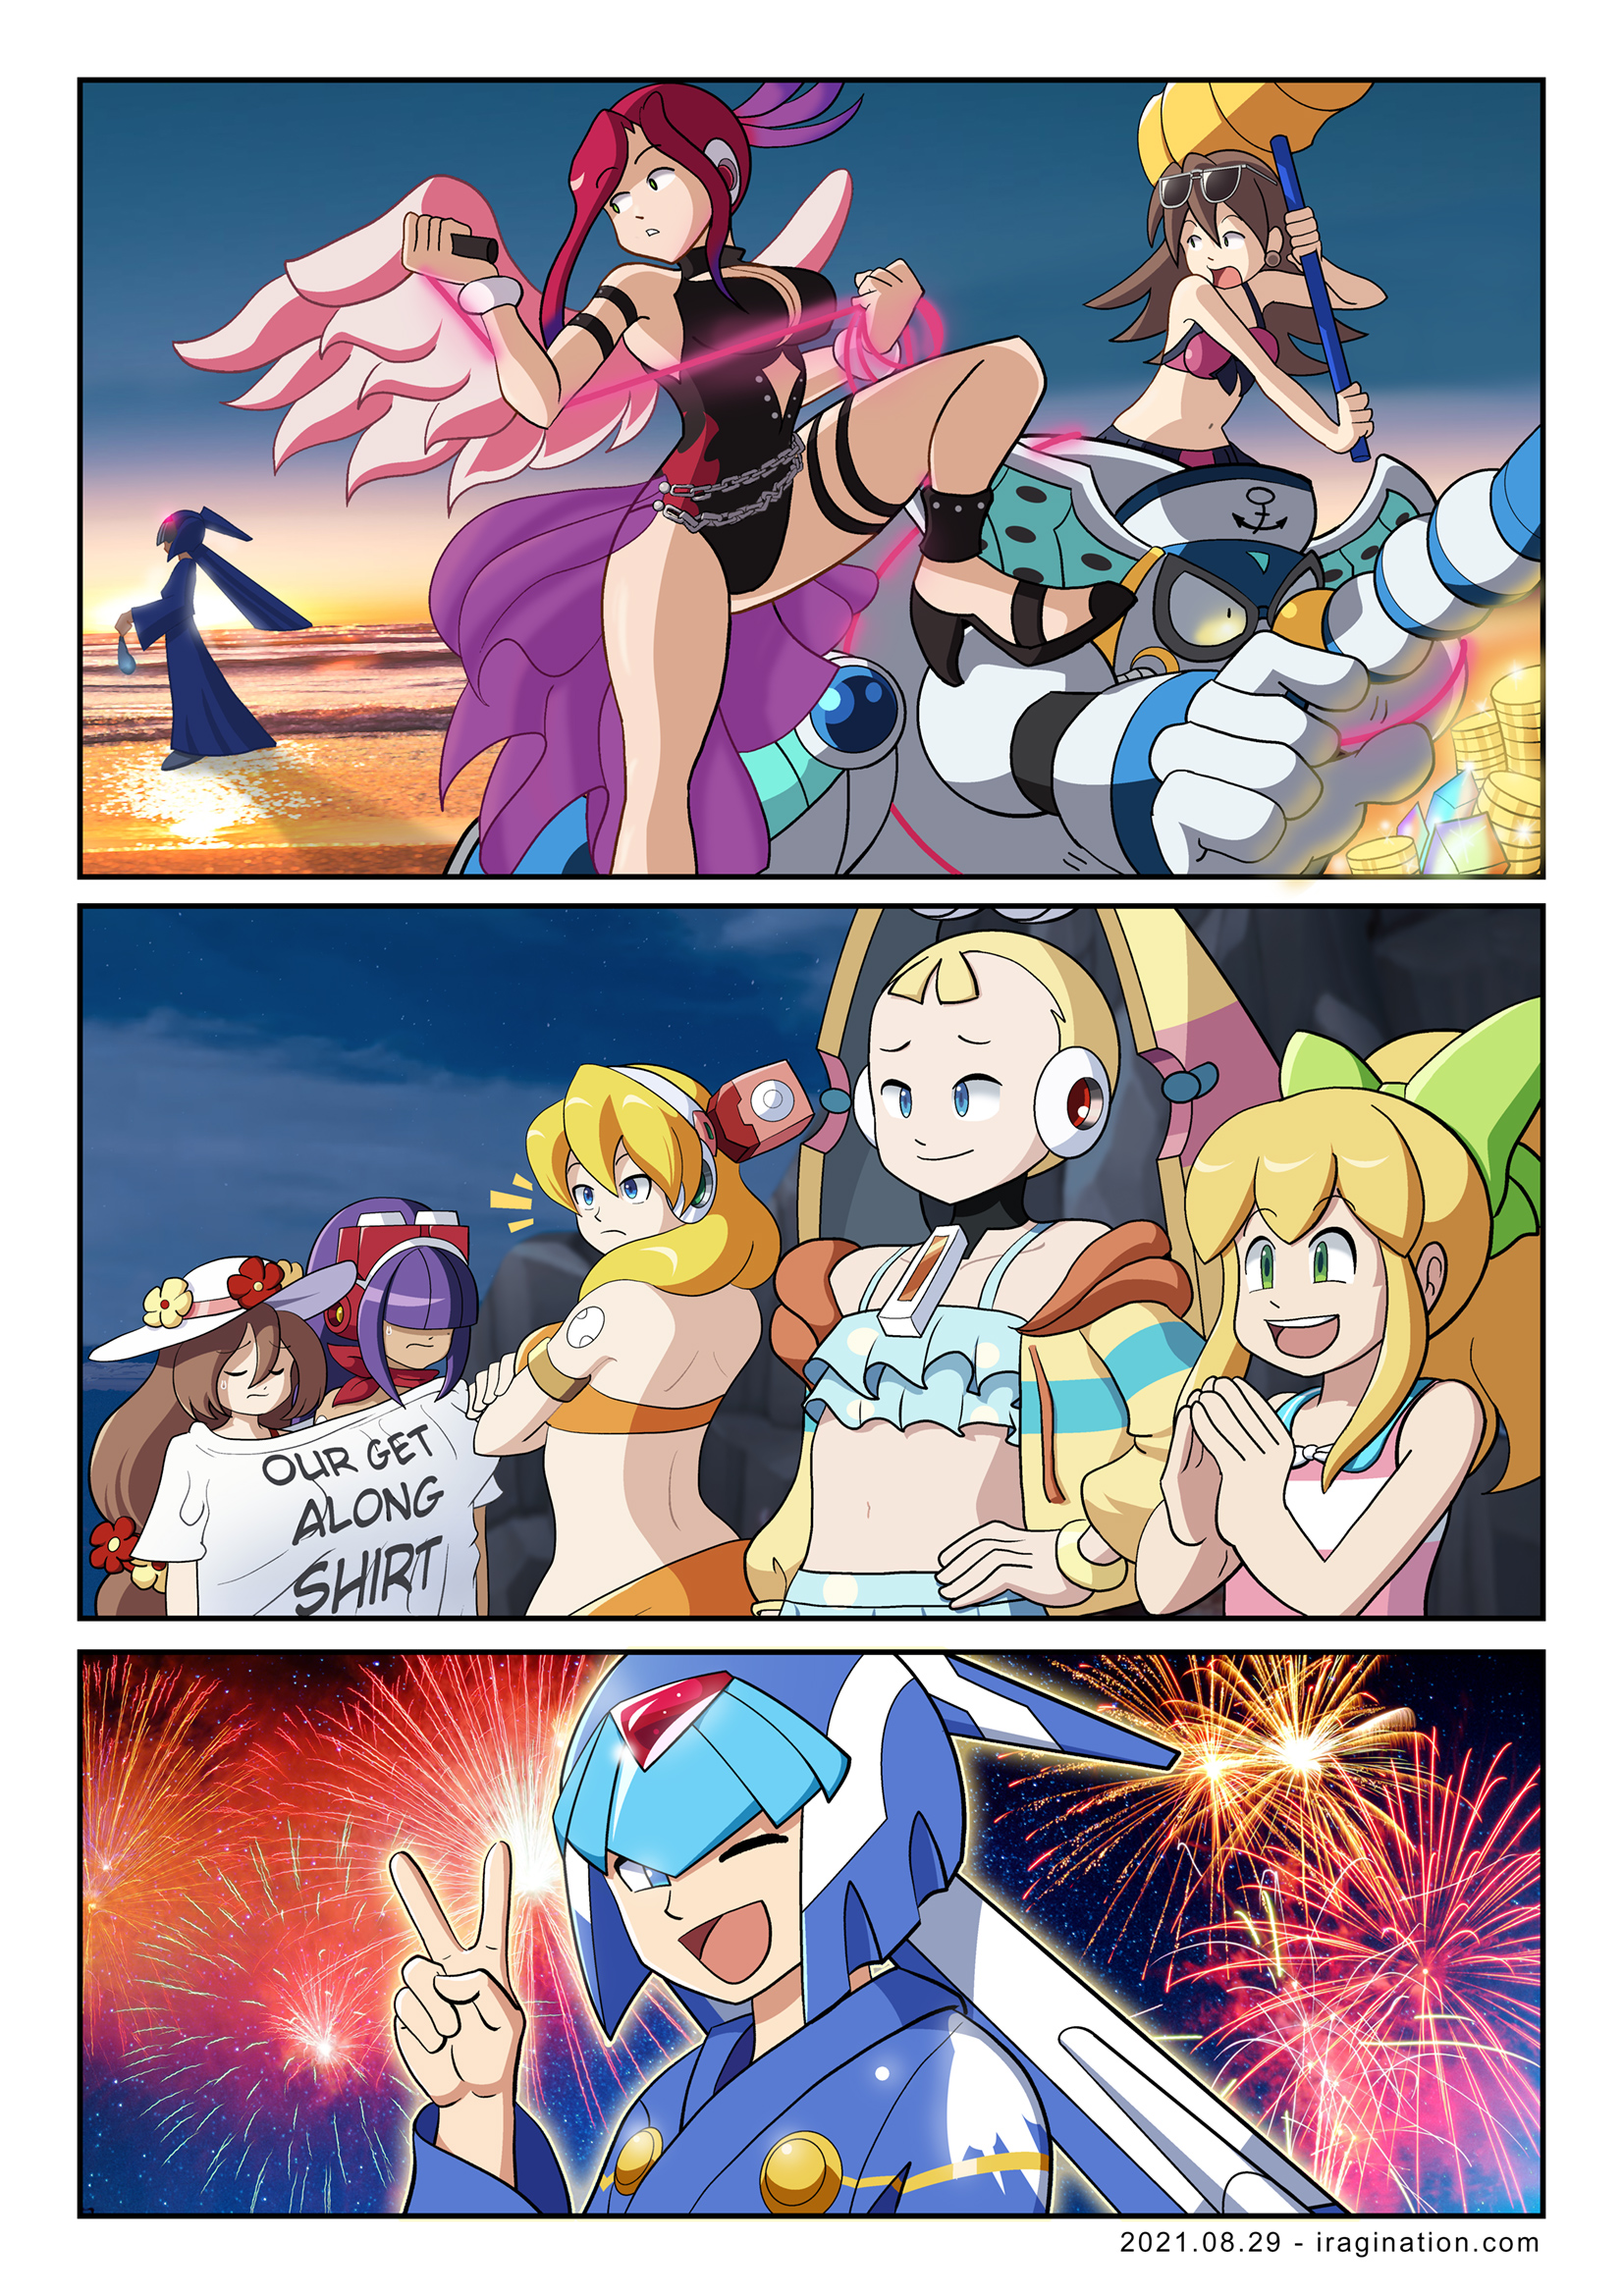 Summer Vacation / Fireworks and Lantern Festival 2021 – Rockman X DiVE
I missed many Rockman X DiVE events during the summer. They showed up so quickly. [url=https://www.iragination.com/illust/displayimage.php?pid=521]Like last year[/url], at least I managed to make this illustration with some memorable moments. Overall, the game has delivered a lot of varied and interesting content.

With so many characters, this was a very challenging piece. But it was fun to draw and an excuse to test some new techniques.

[b]References[/b]
[url=https://www.facebook.com/CAPCOM.RXD/videos/879402822649085]Summer Treasure Hunt[/url]

[url=https://www.facebook.com/CAPCOM.RXD/videos/964662204315839]Swimsuit Pallette[/url]

[url=https://www.facebook.com/CAPCOM.RXD/posts/783102925719132]Swimsuit Roll – Revamped version[/url]

[url=https://www.facebook.com/CAPCOM.RXD/posts/807850213244403]Festive Leviathan[/url]

[b]Photos[/b]
[url=https://www.pexels.com/photo/scenic-view-of-ocean-during-sunset-1032650/]1[/url] [url=https://www.pexels.com/photo/plants-under-starry-sky-355887/]2[/url] [url=https://www.pexels.com/photo/fireworks-photo-634694/]3[/url] [url=https://www.pexels.com/photo/light-red-new-year-s-eve-colorful-33253/]4[/url]

Keywords: ferham tron leviathan flame_mammoth iris layer alia pallette roll